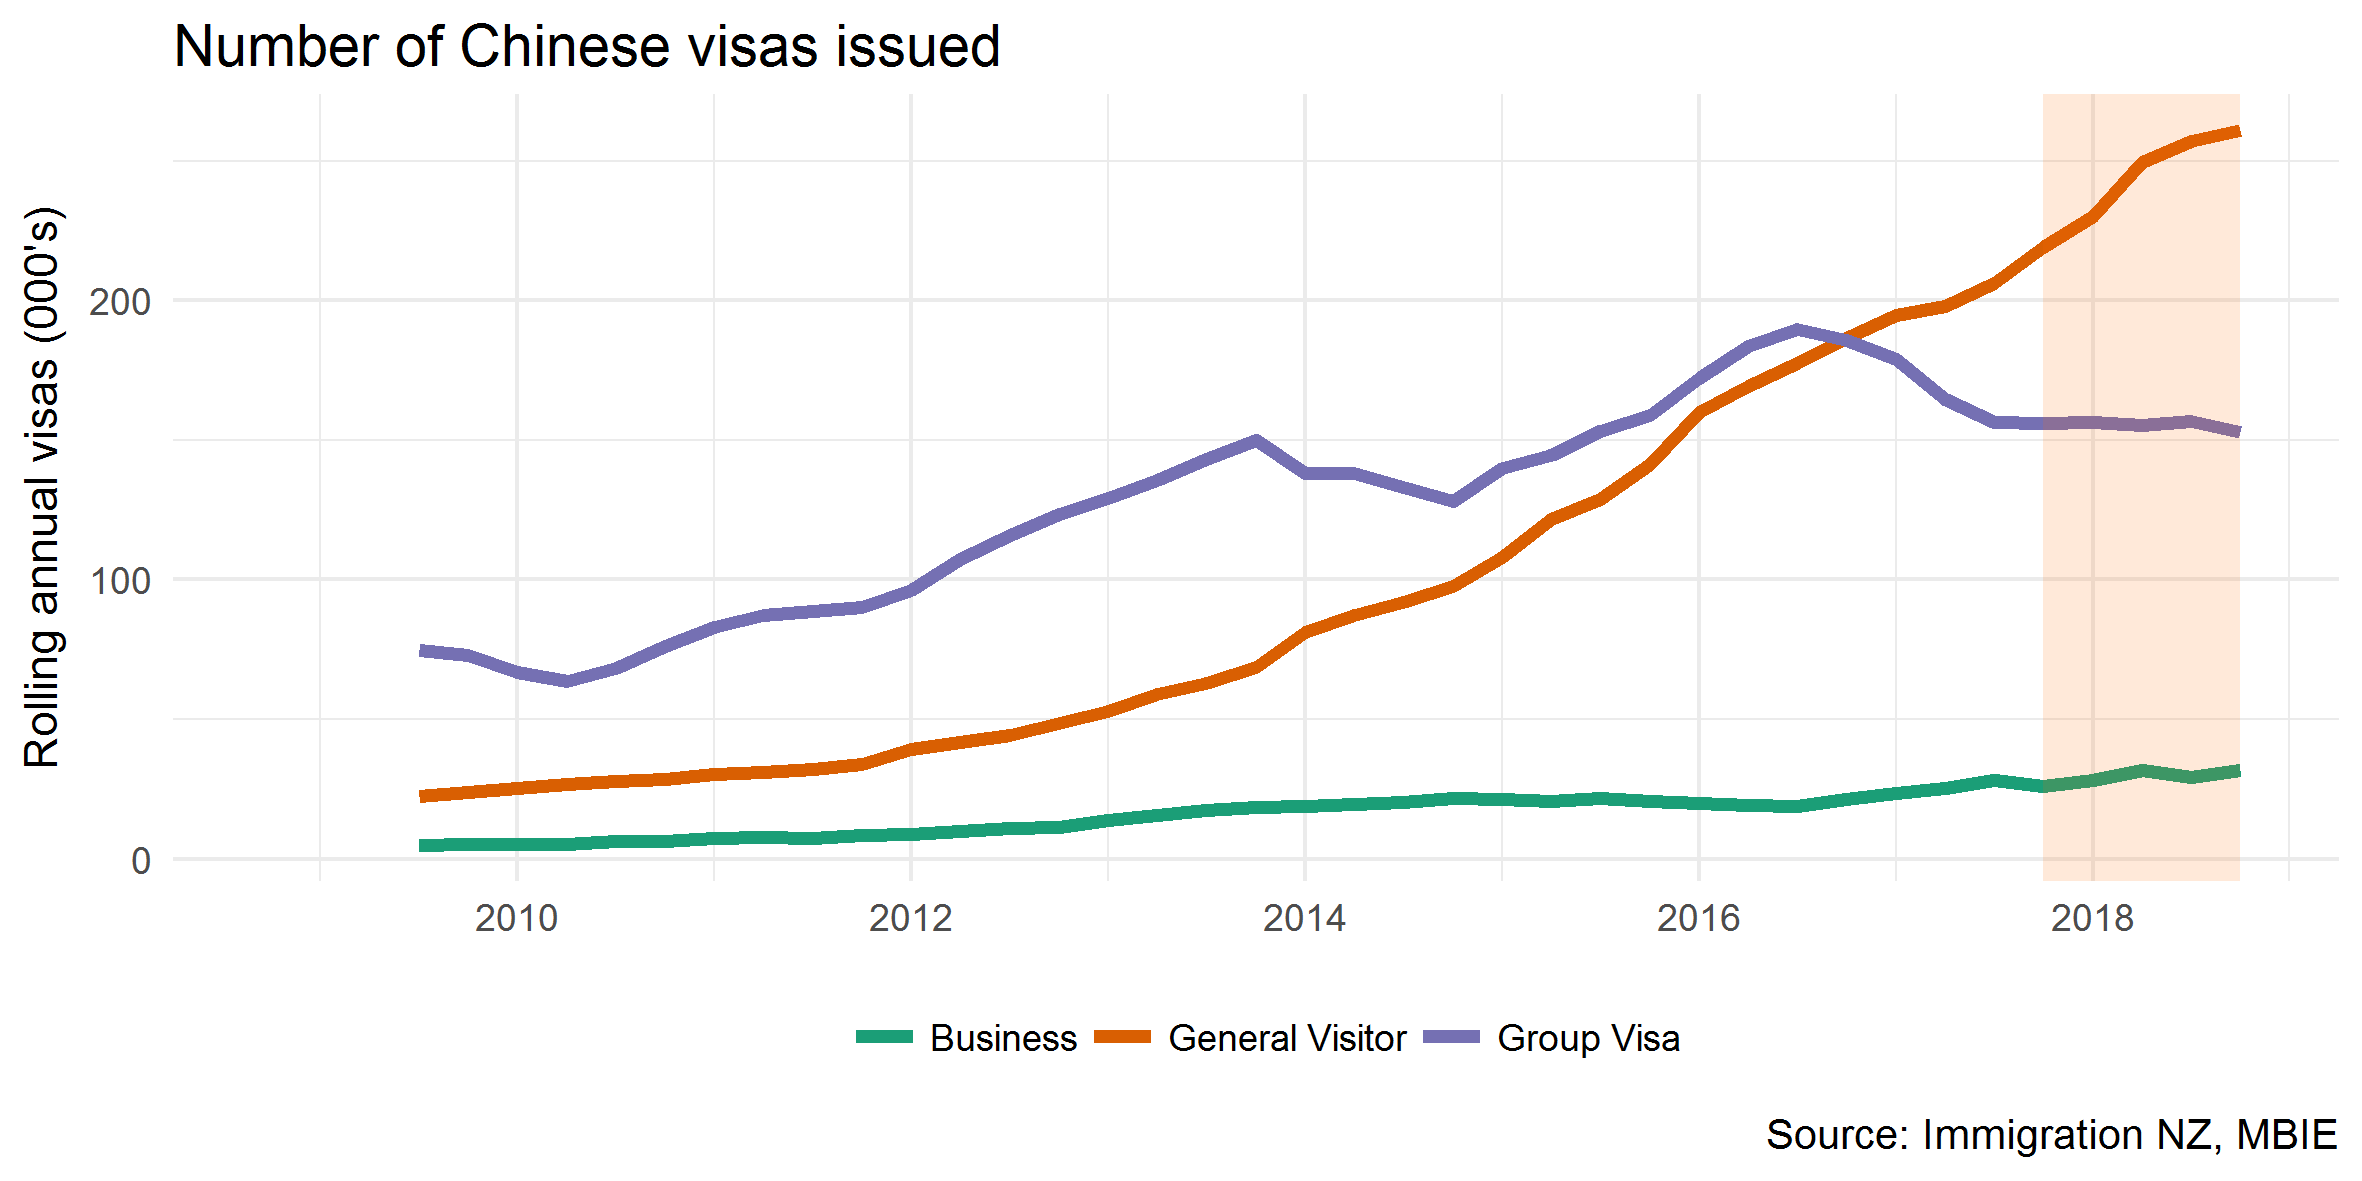 Number of Chinese visas issued